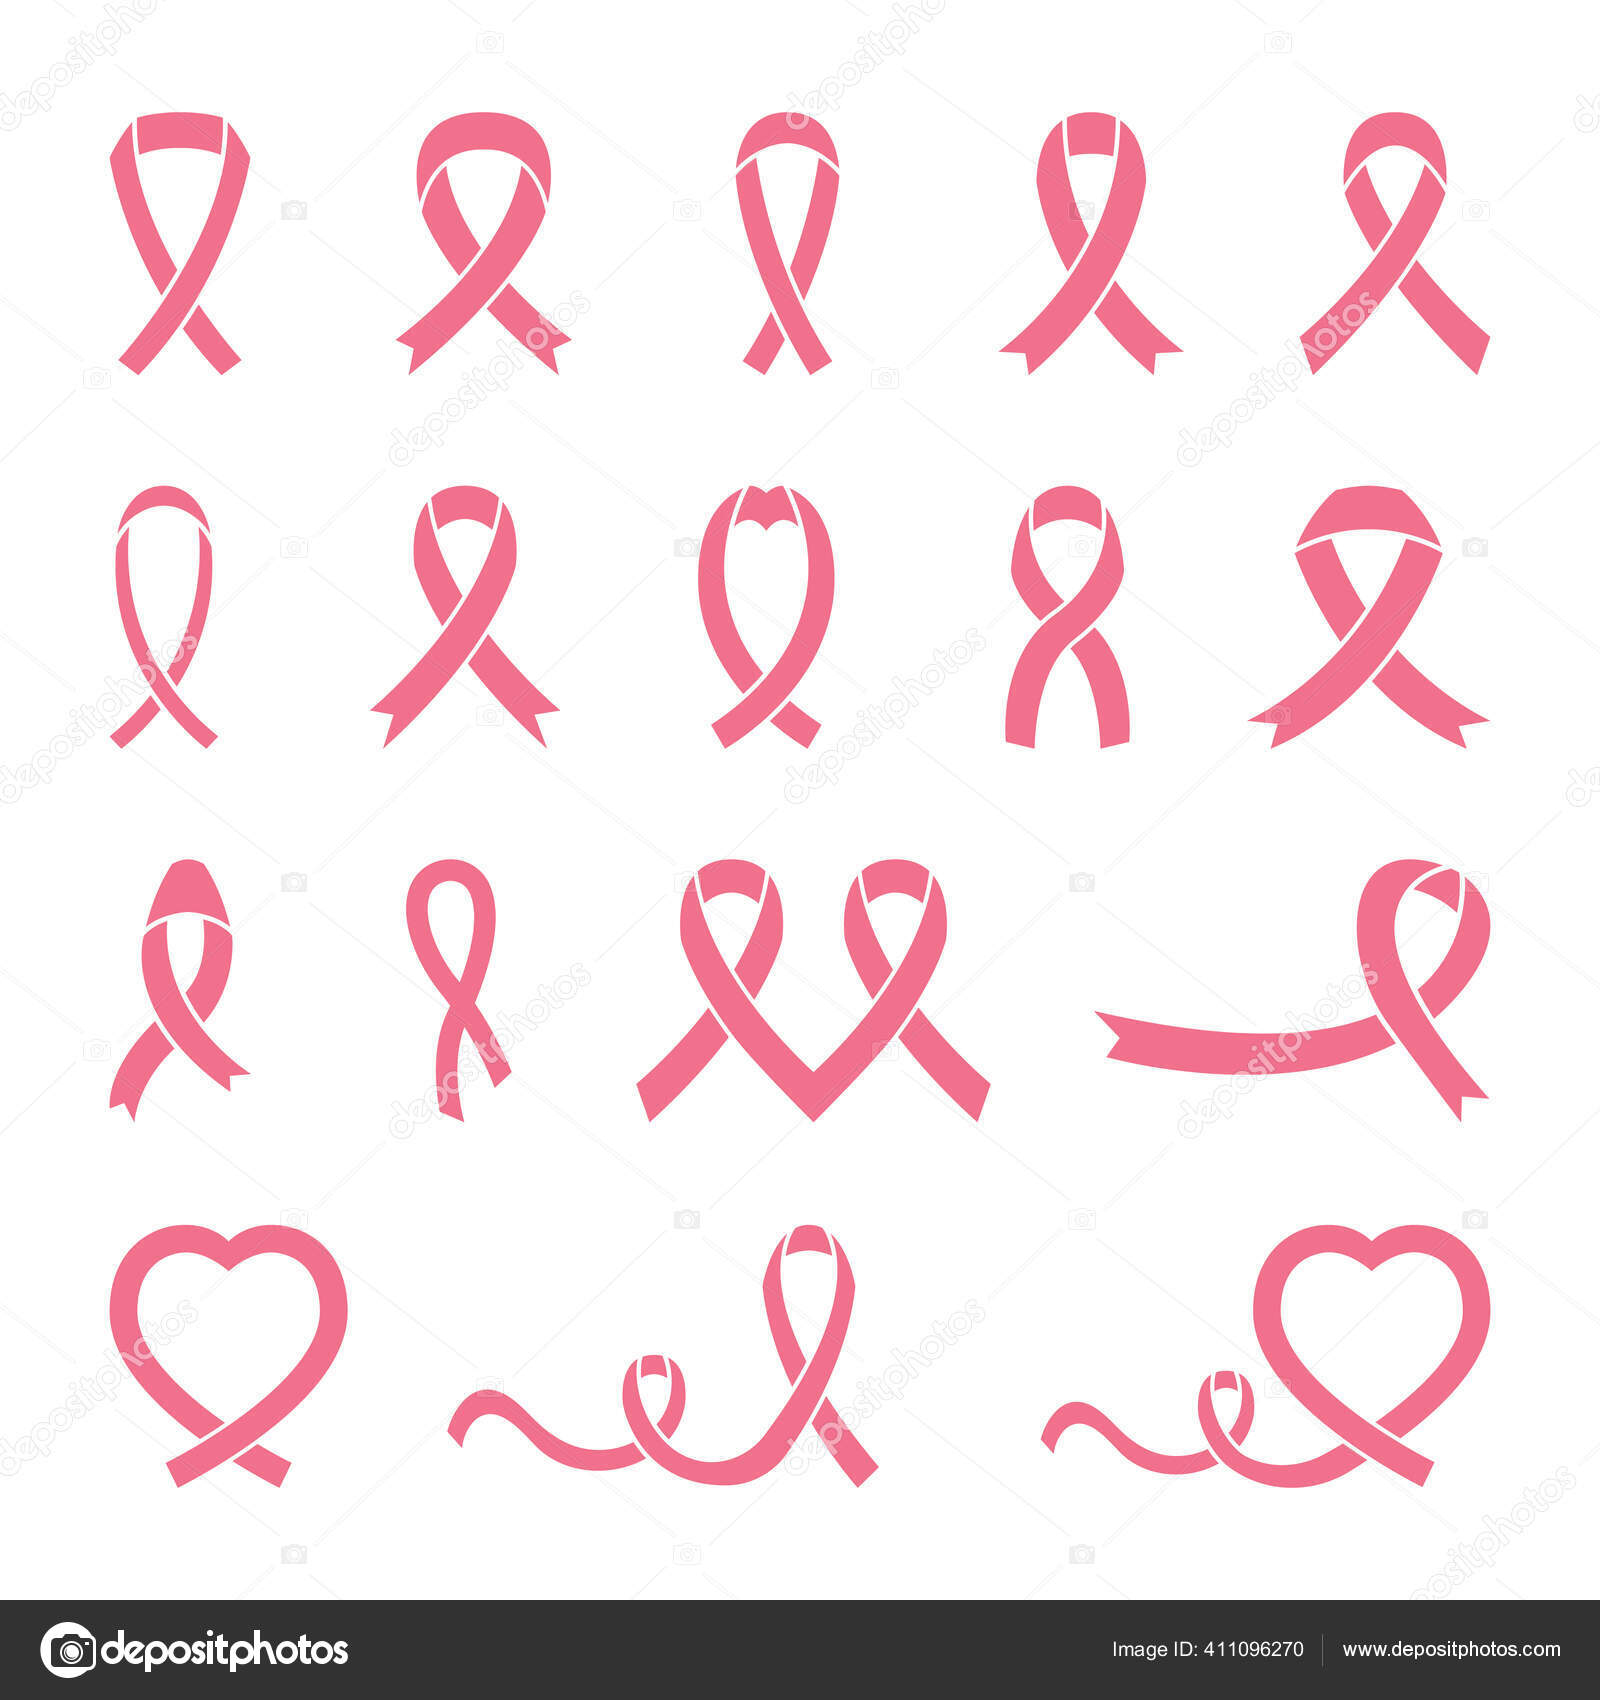 Set of pink ribbons for breast cancer awareness. Vector